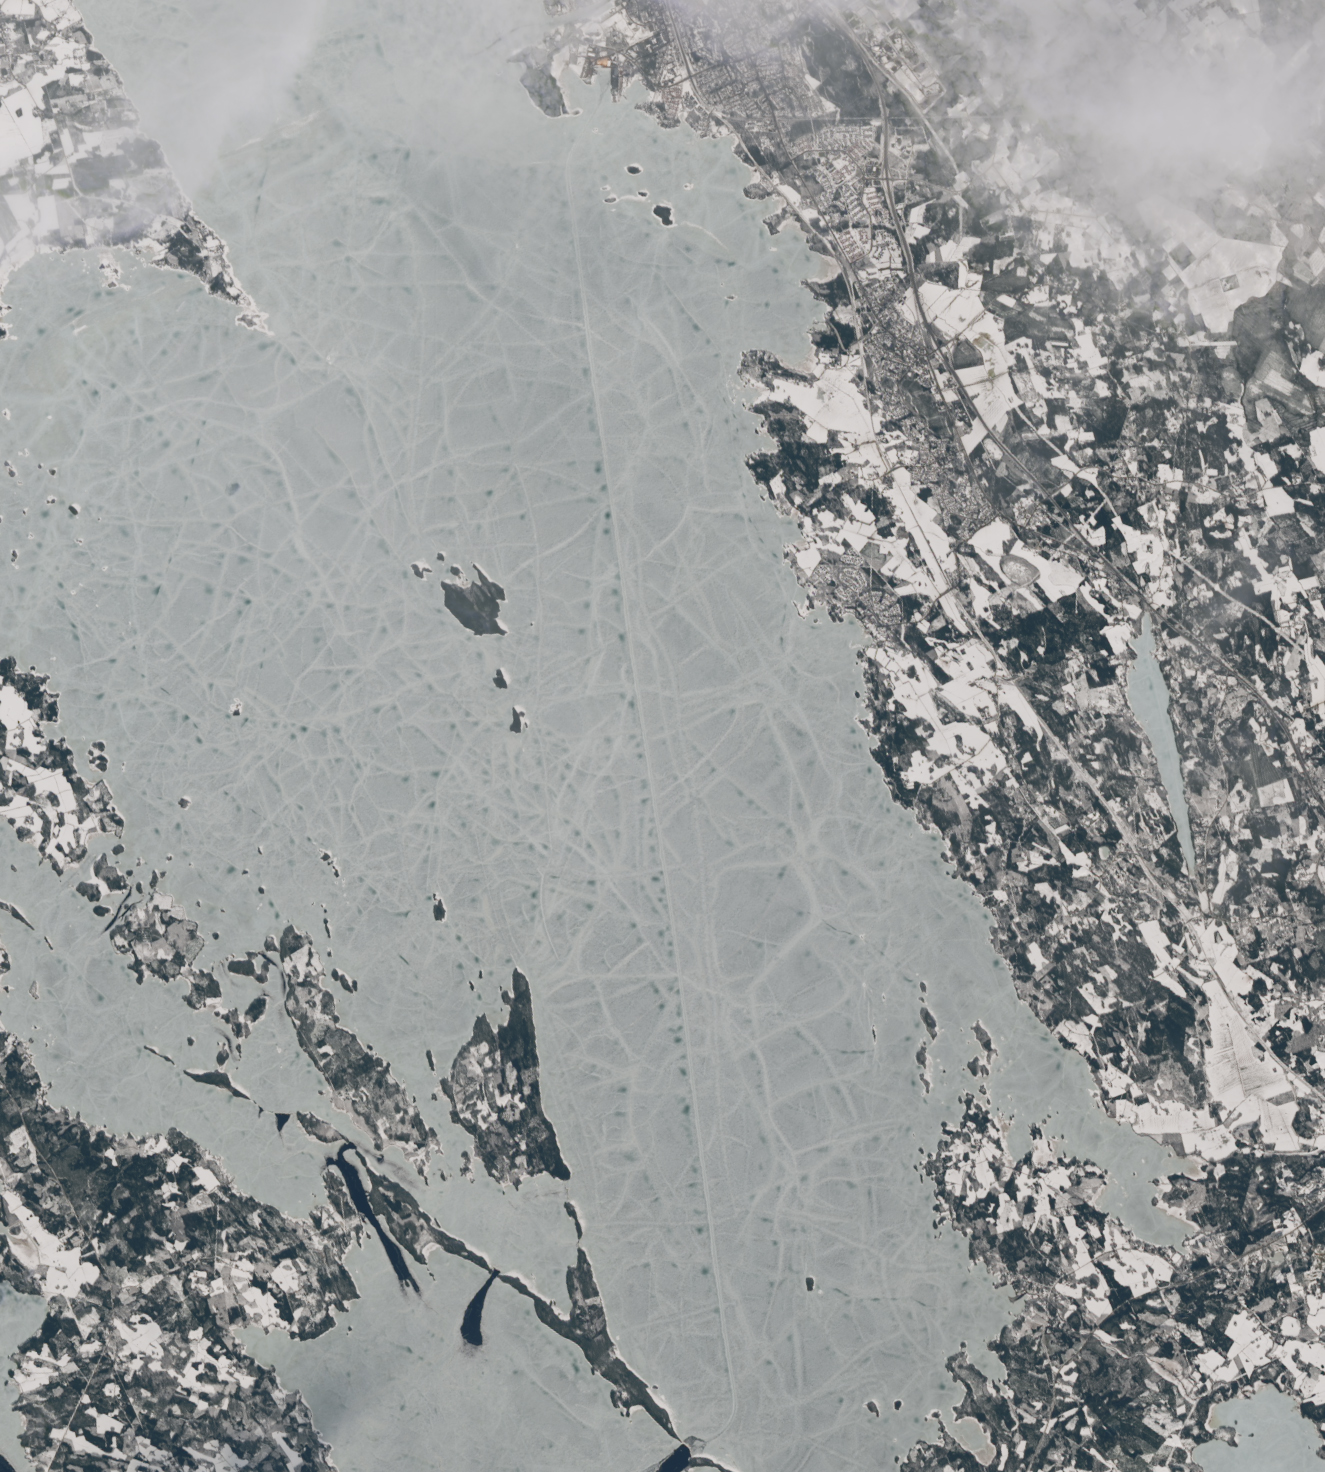 An icy lake centers the image with mainland to the right and sporadic islands and some smaller inhabited peninsulas to the left. The land is covered in snow. A vertical line of bright white ice is seen south of the lone visible population center.